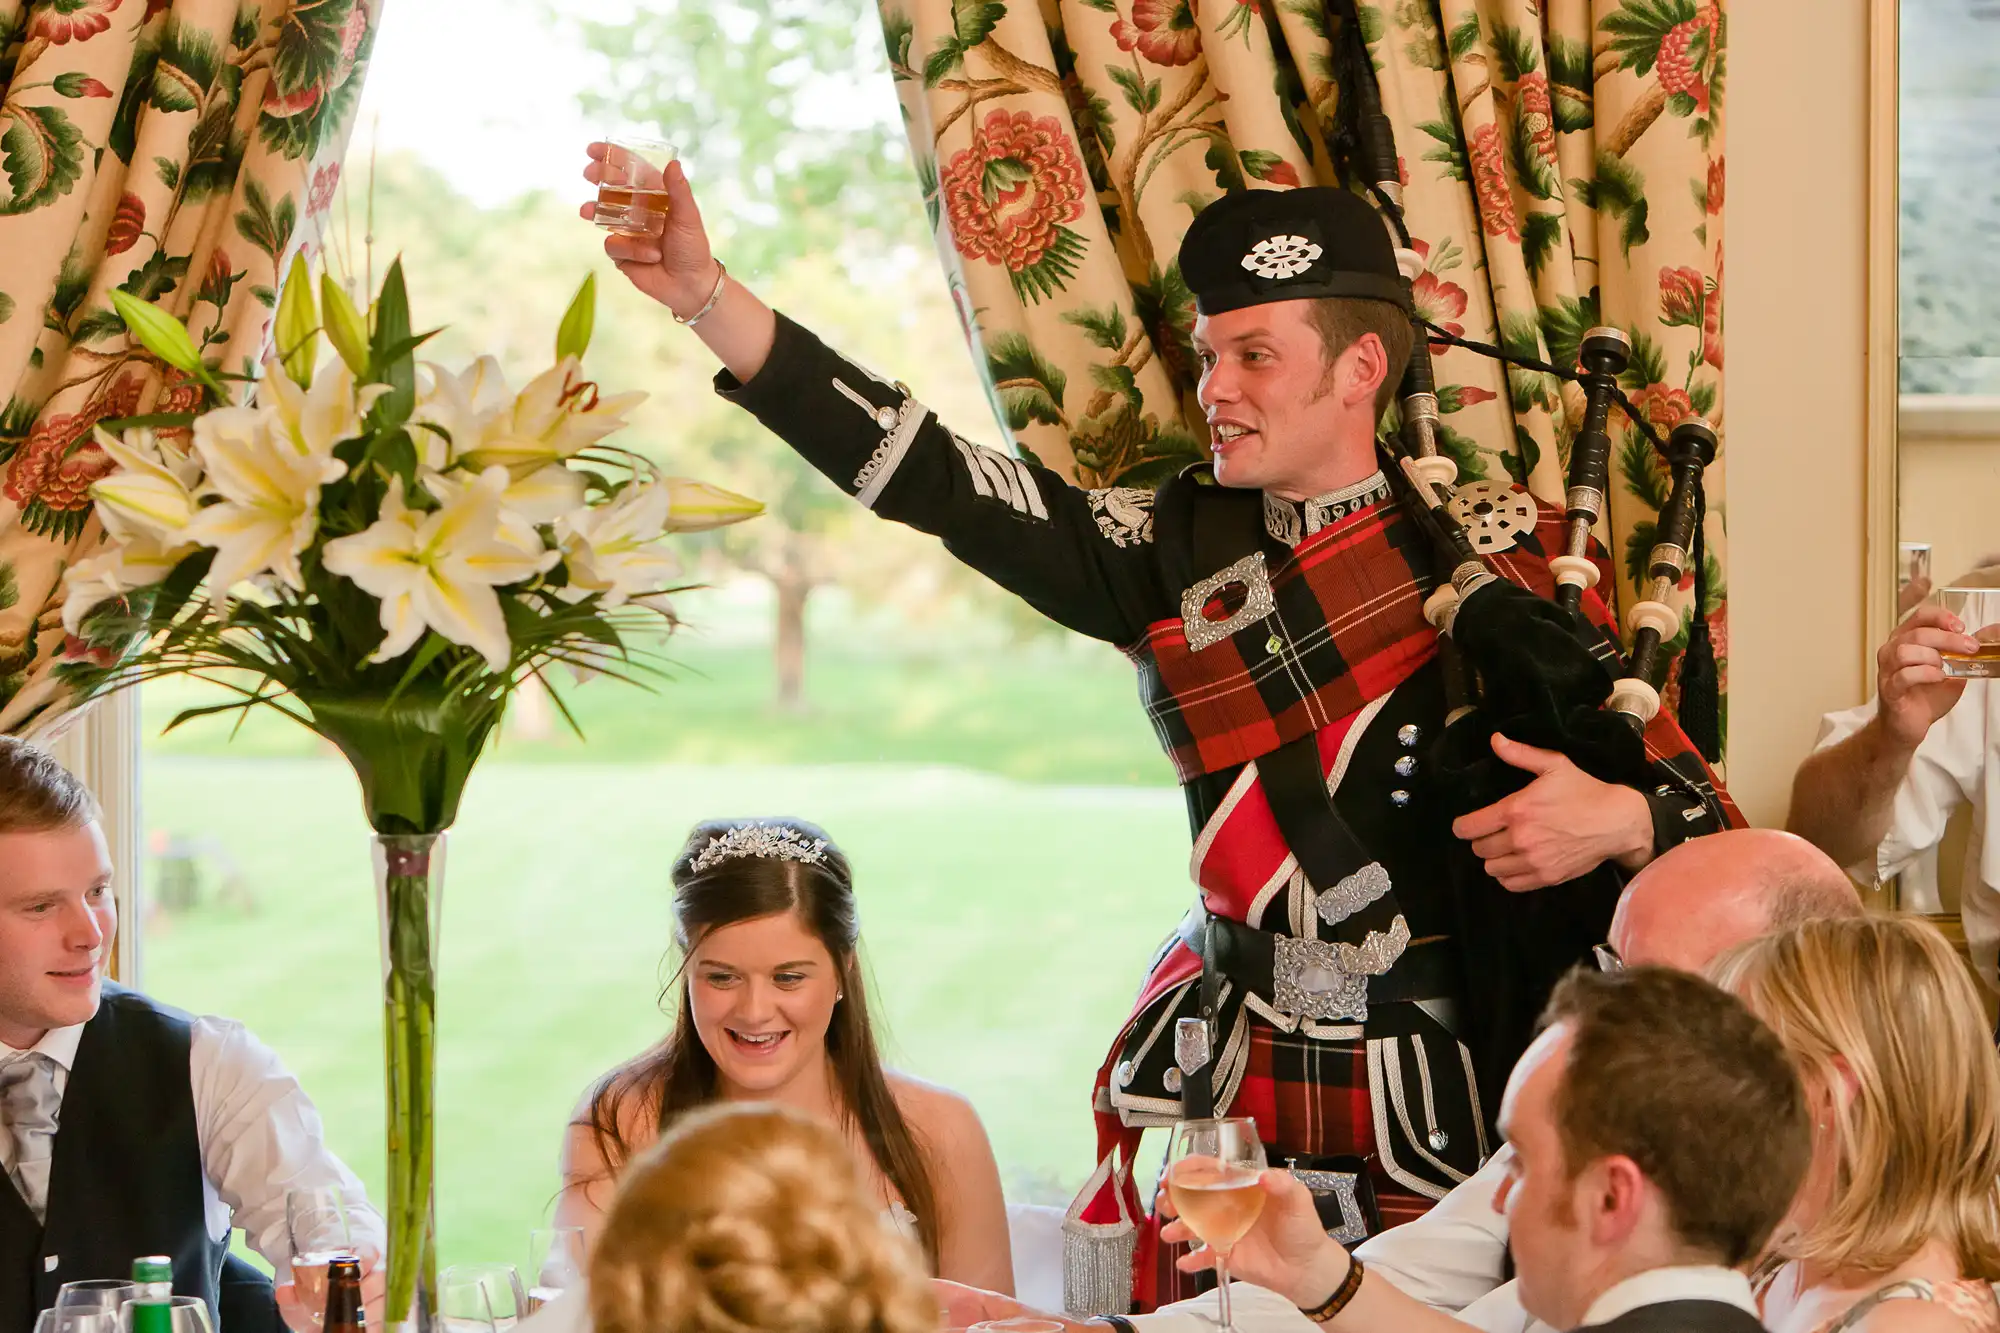 A man in traditional scottish attire, holding a bagpipe, toasts at a wedding reception while guests look on.